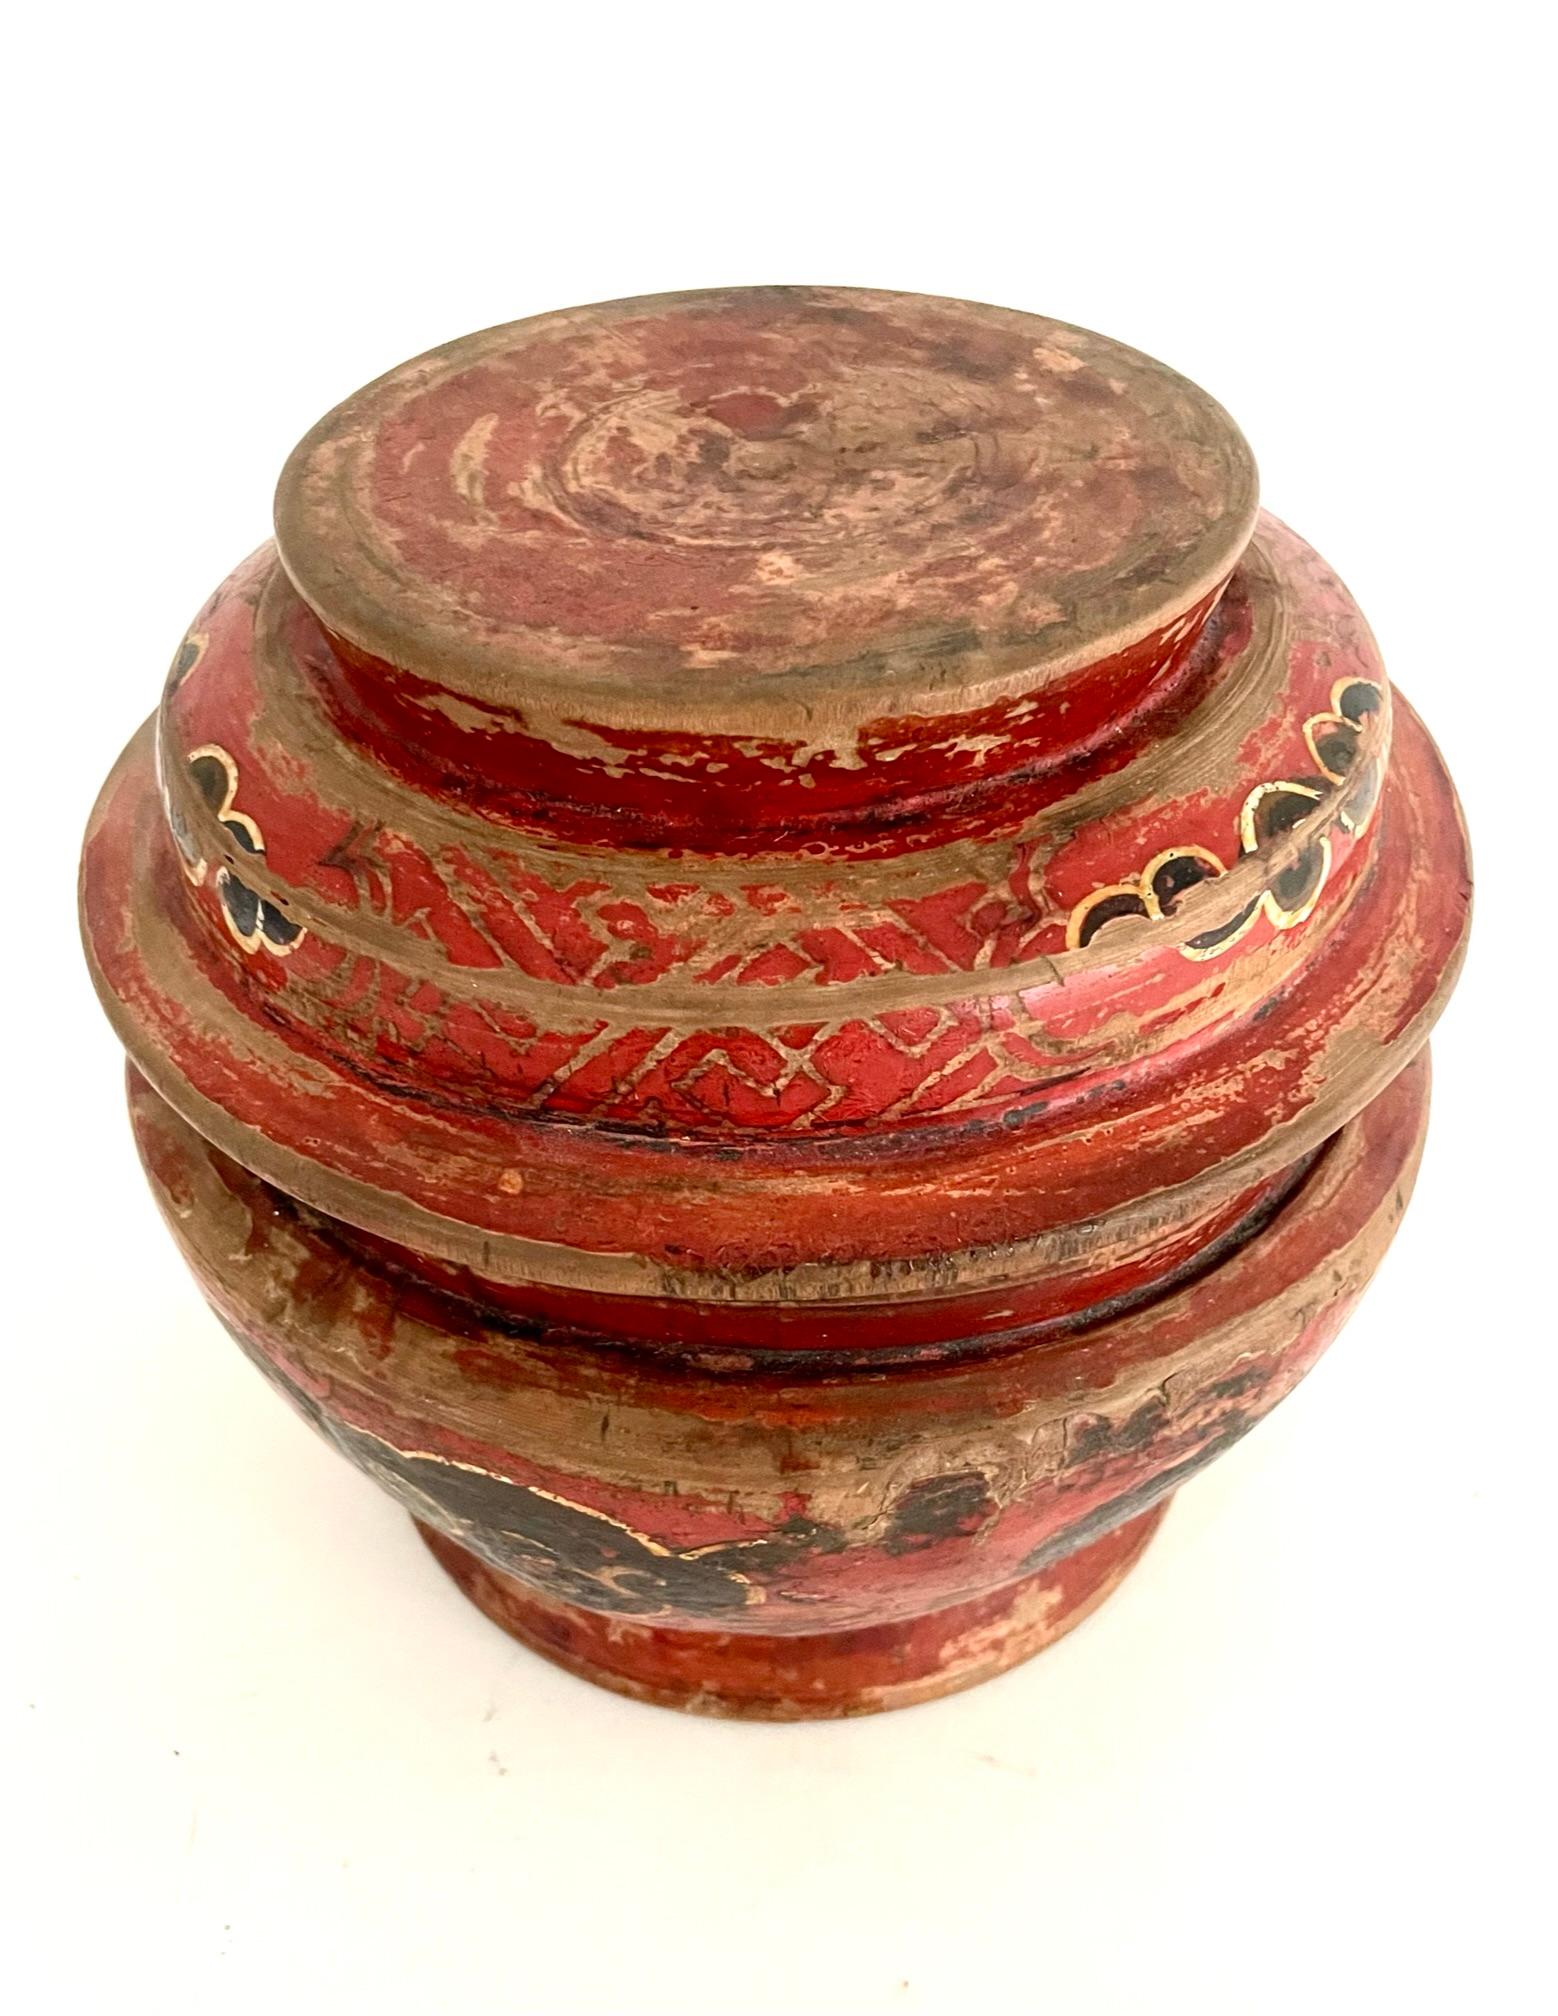 A beautiful late 19th century paint bowl with a lid that was once used for storing the famous Tibetan barley flour (Tsampa). These bowls were used by the Buddhist mountain people of the Himalayas. This fine bowl is hand carved out of hardwood and is